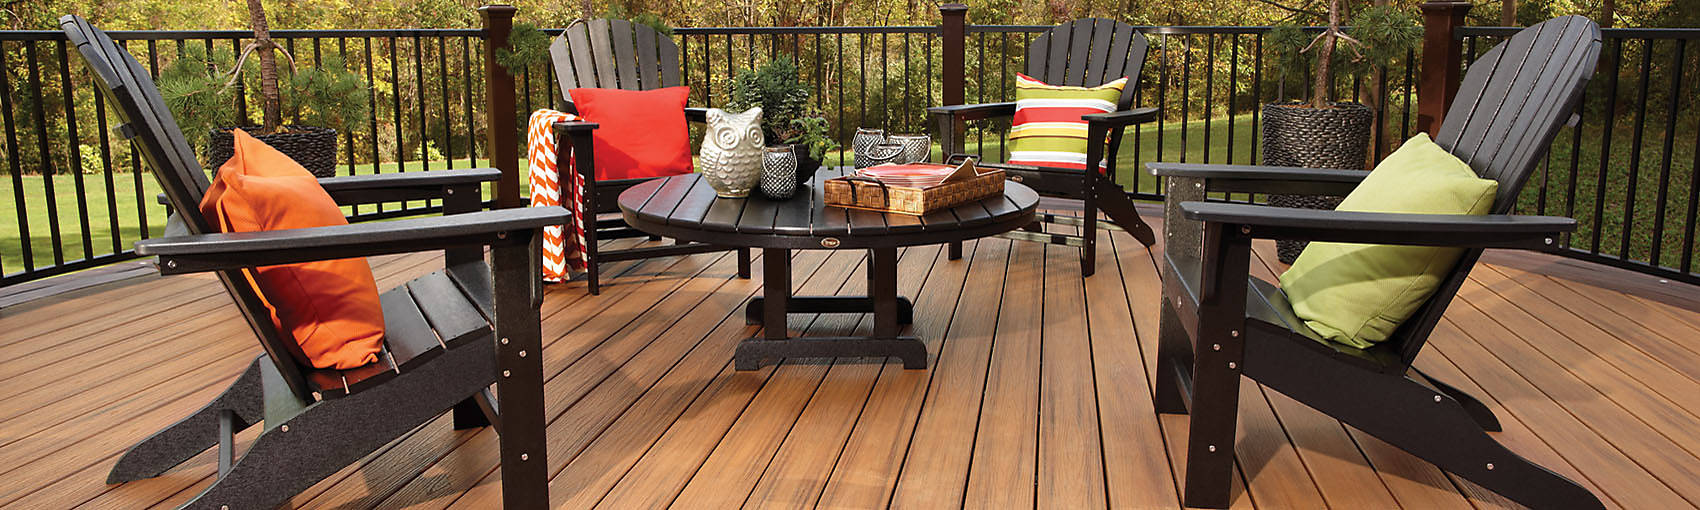 transcend-decking-reveal-railing-tiki-torch-chairs2